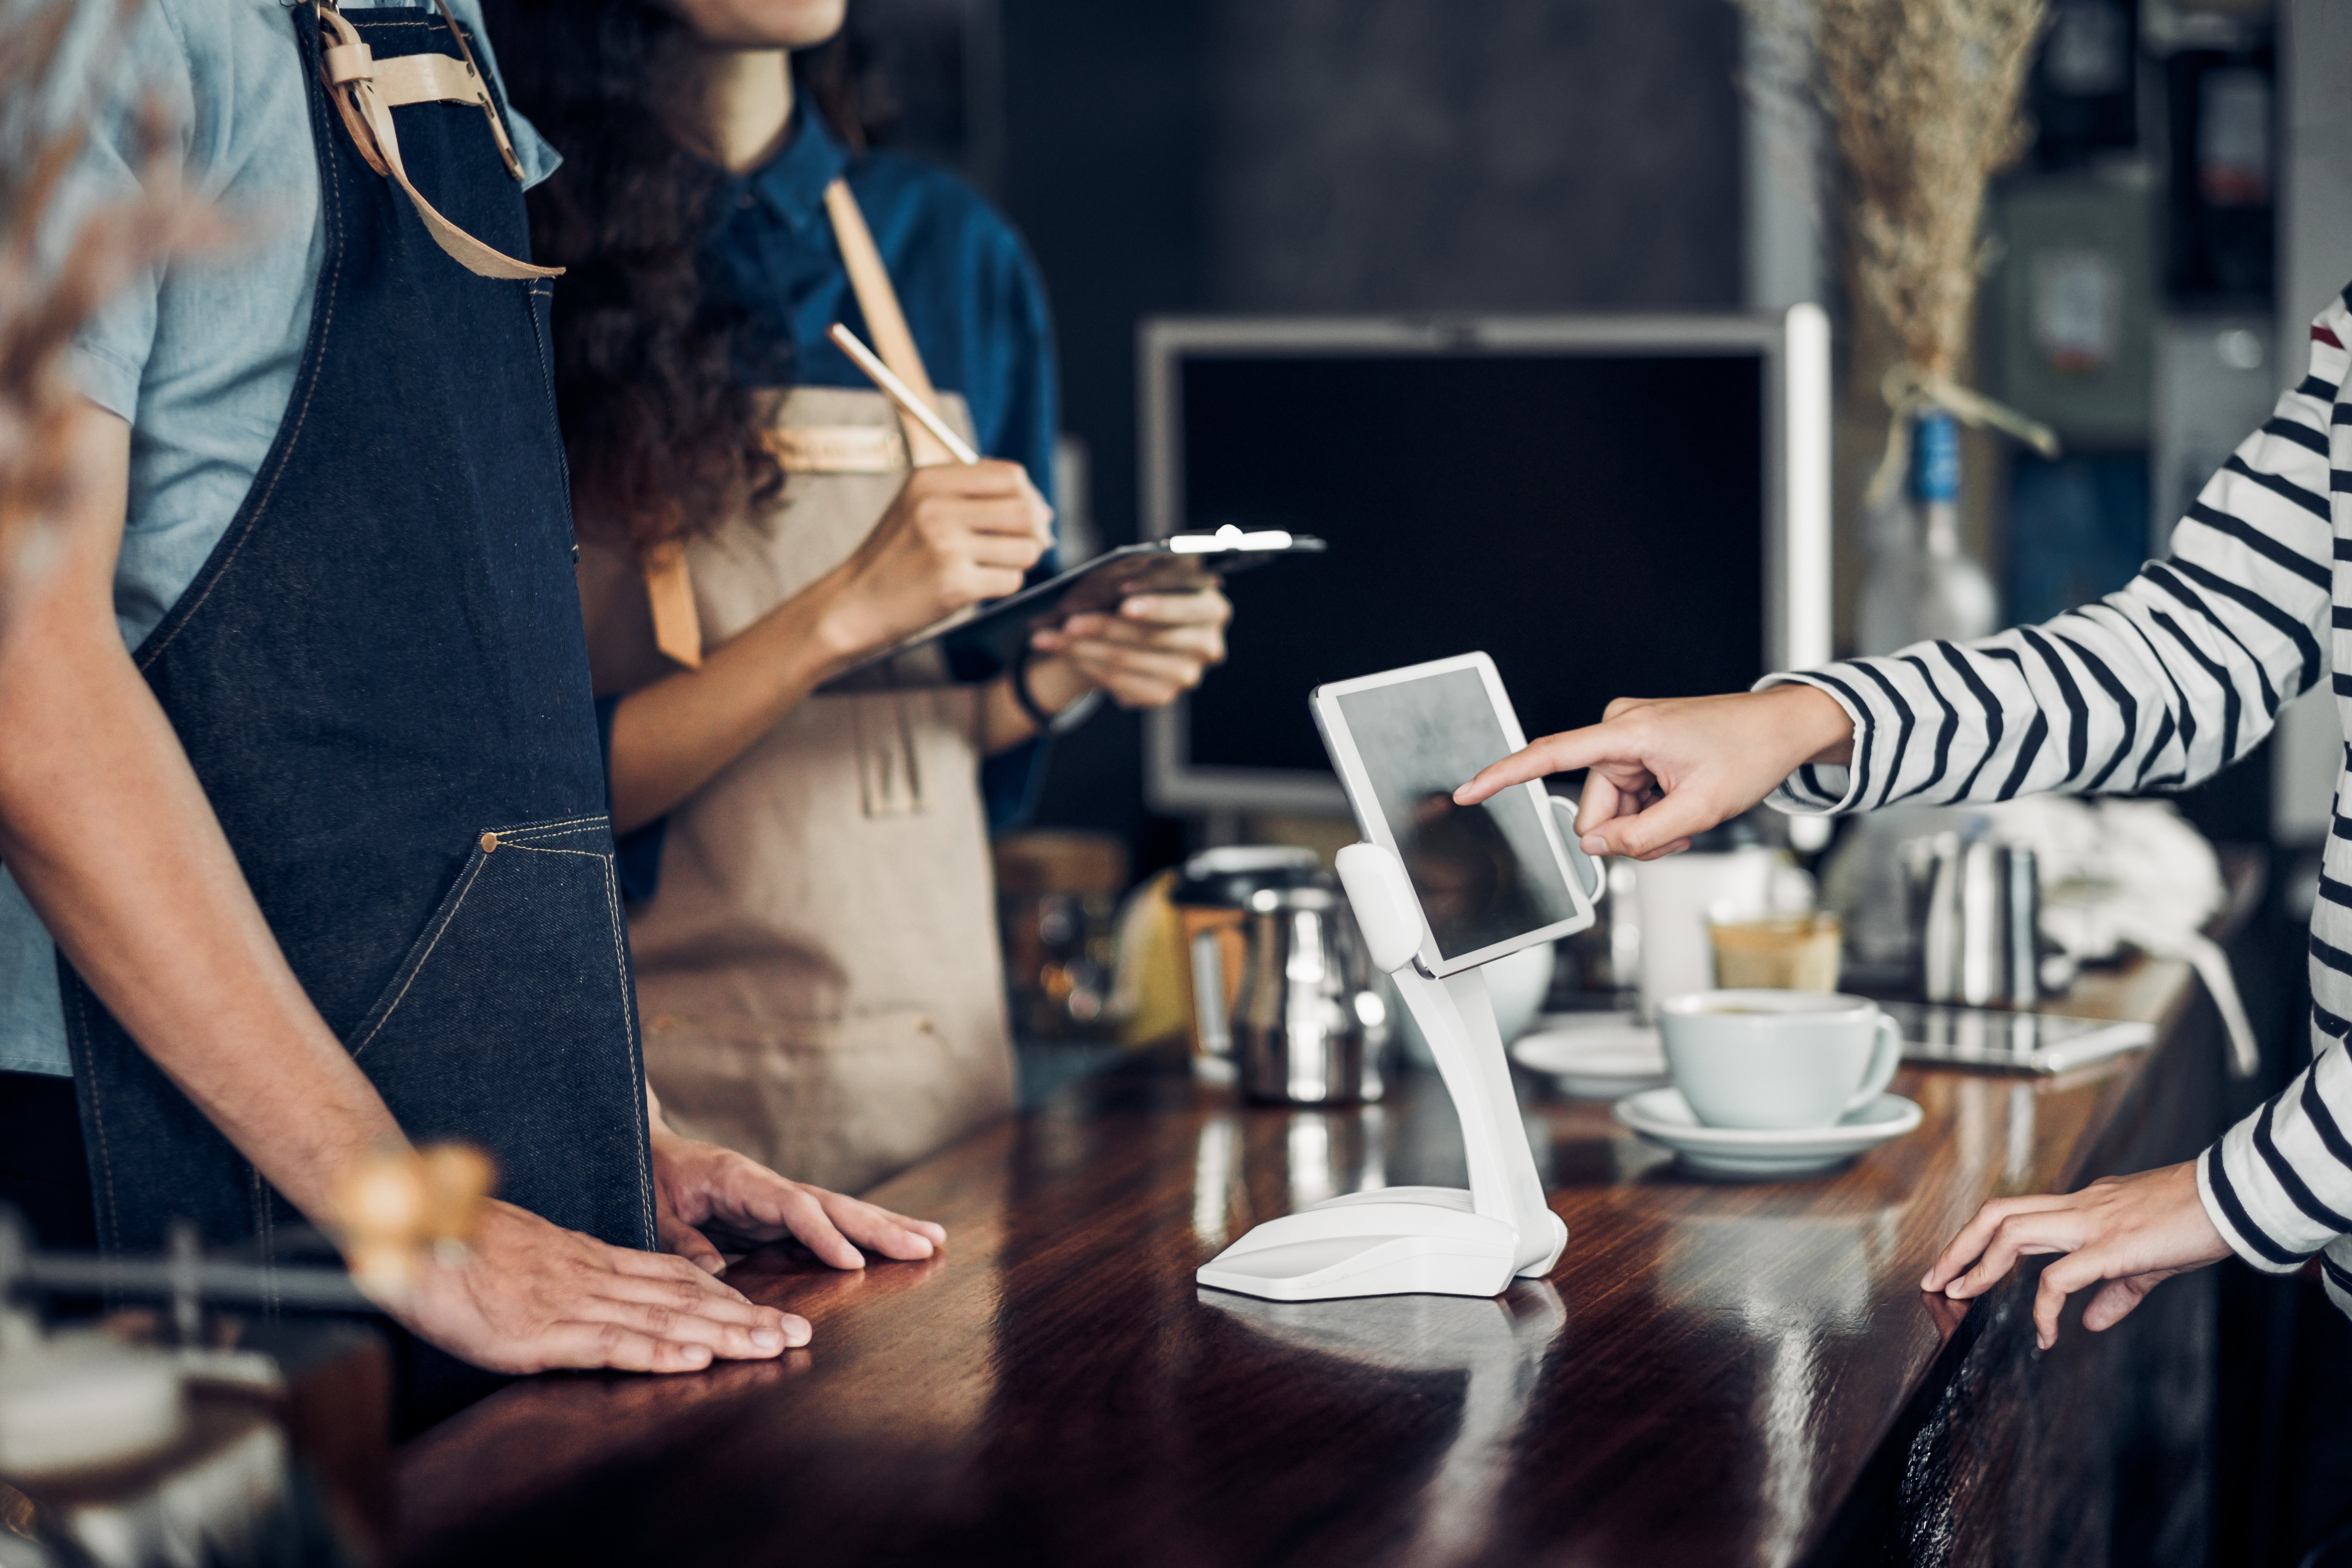 5 Restaurant Technology Trends to Future-Proof Operations and Improve Profitability in 2023